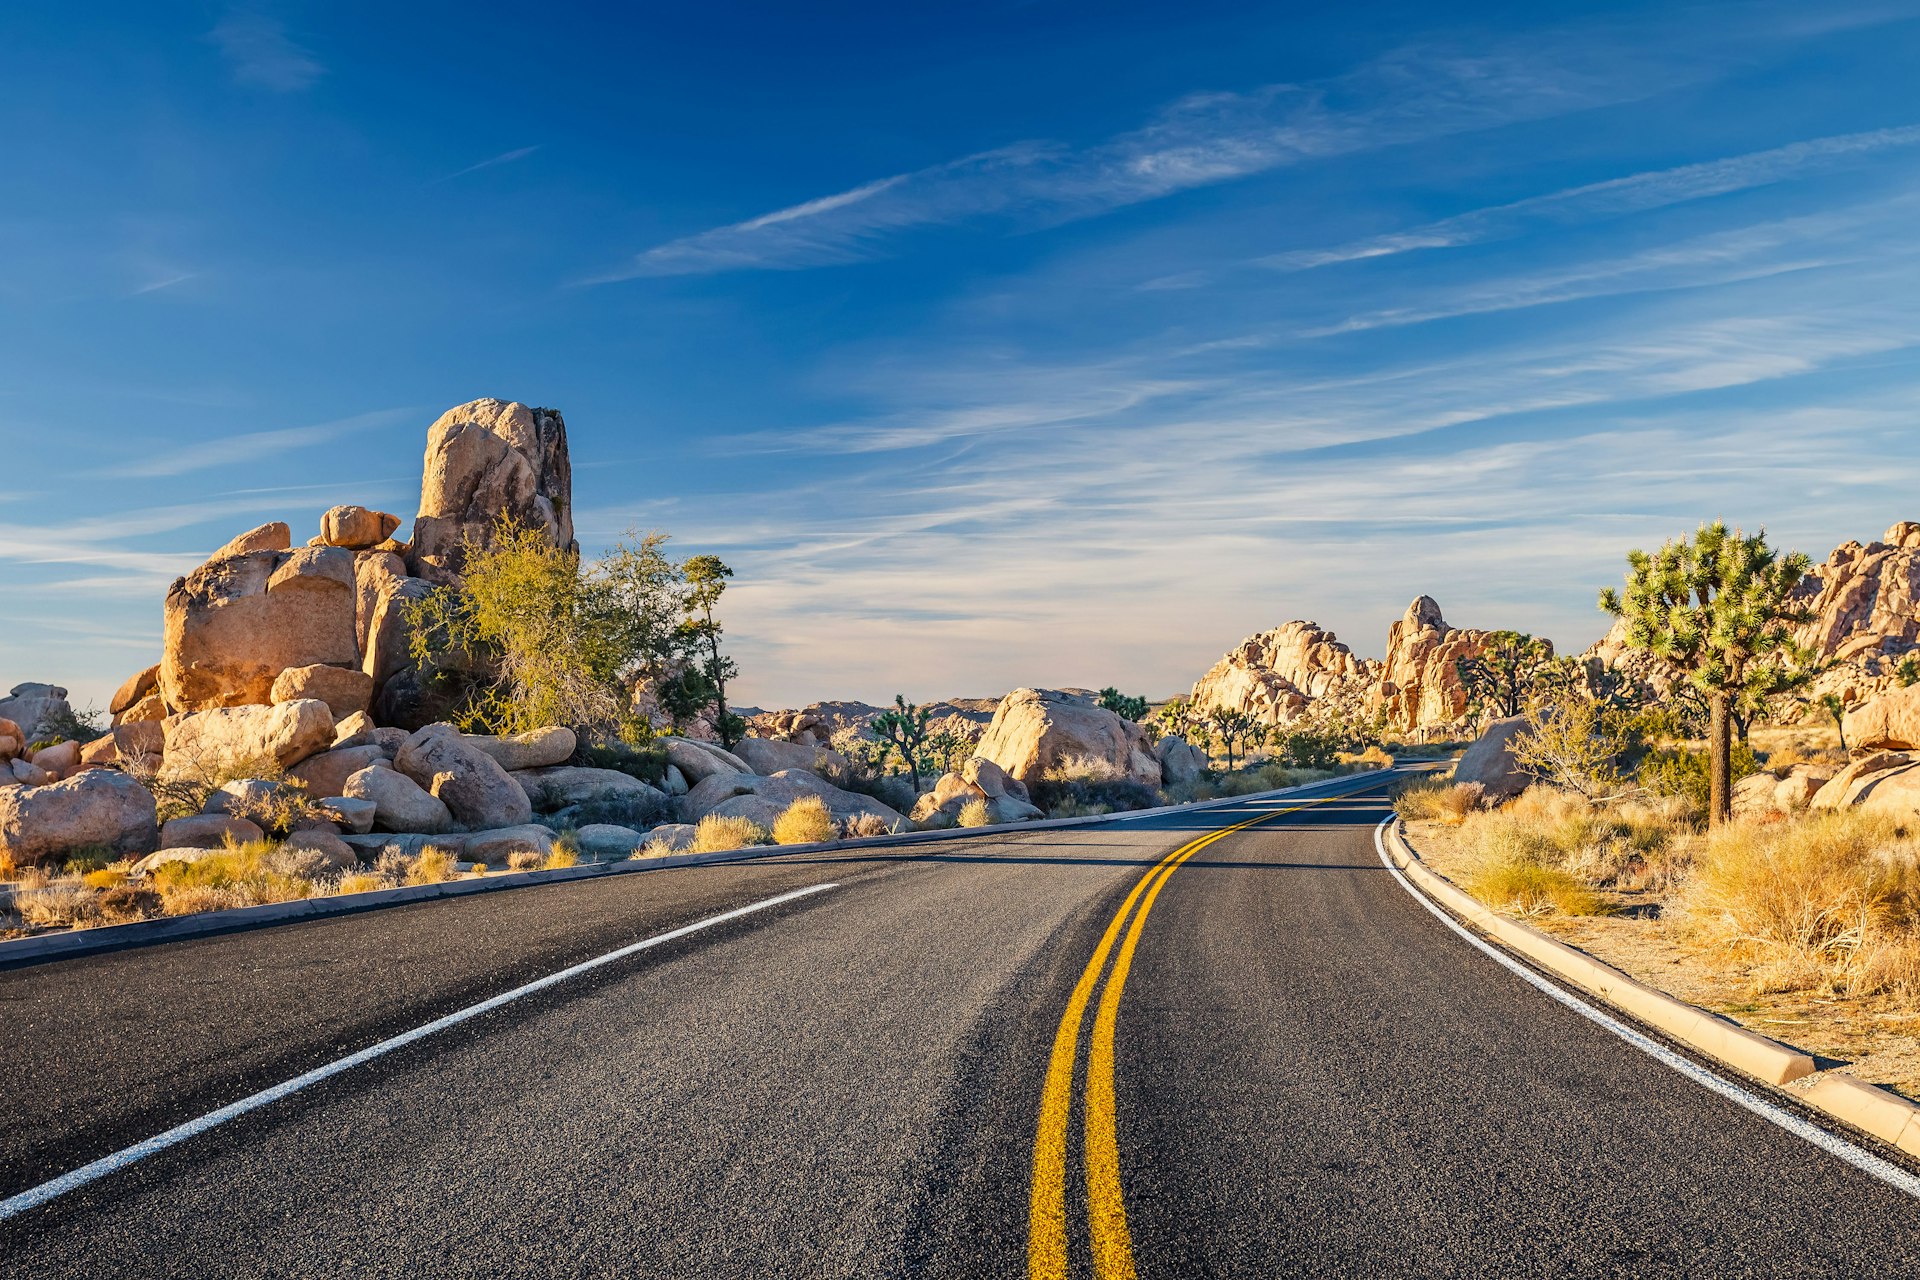 An empty road through the Joshua Tree National Park in the Mojave Desert